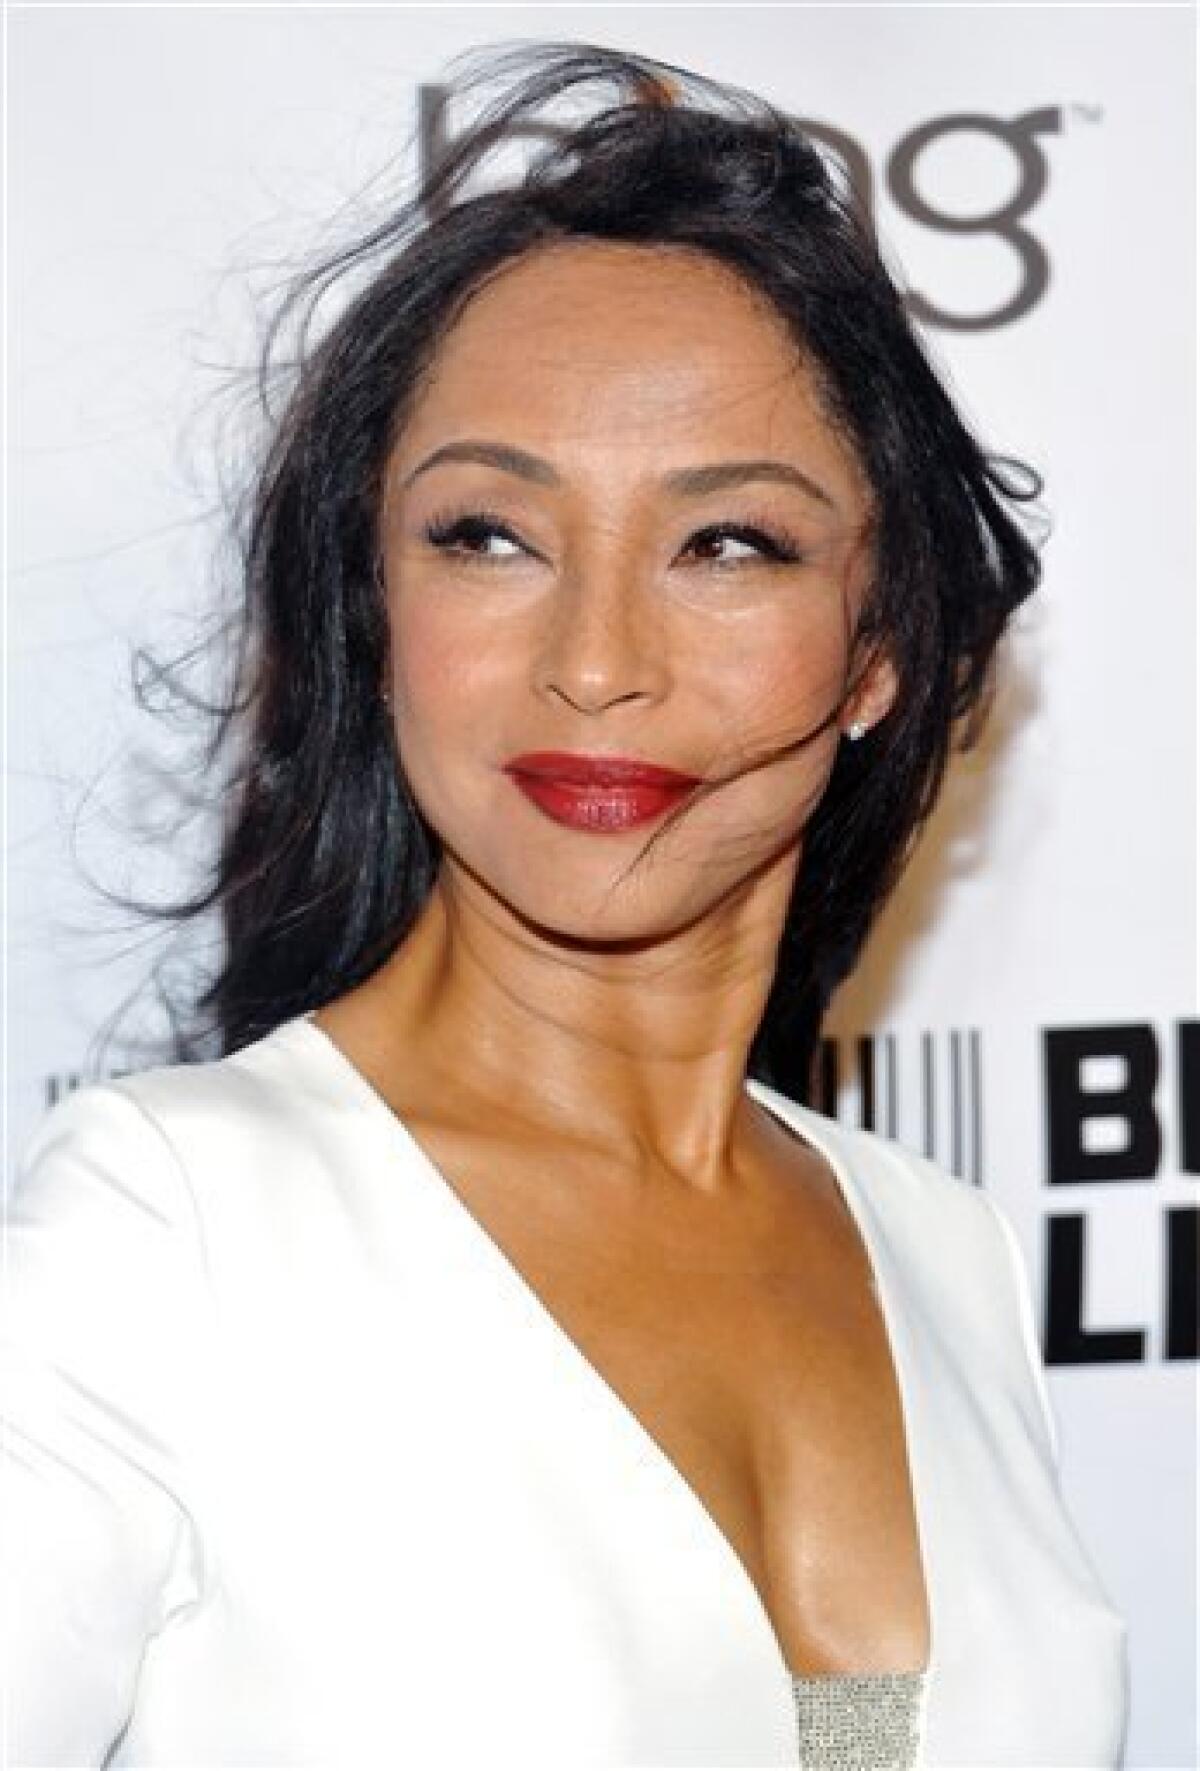 FILE - In this Sept. 30, 2010 file photo, singer Sade Adu arrives at the "Keep A Child Alive Black Ball" at the Hammerstein Ballroom in New York. When she decided to walk the red carpet at Alicia Keys' Black Ball for Keys' Keep a Child Alive charity it was a first for the enigmatic performer. (AP Photo/Evan Agostini, file)